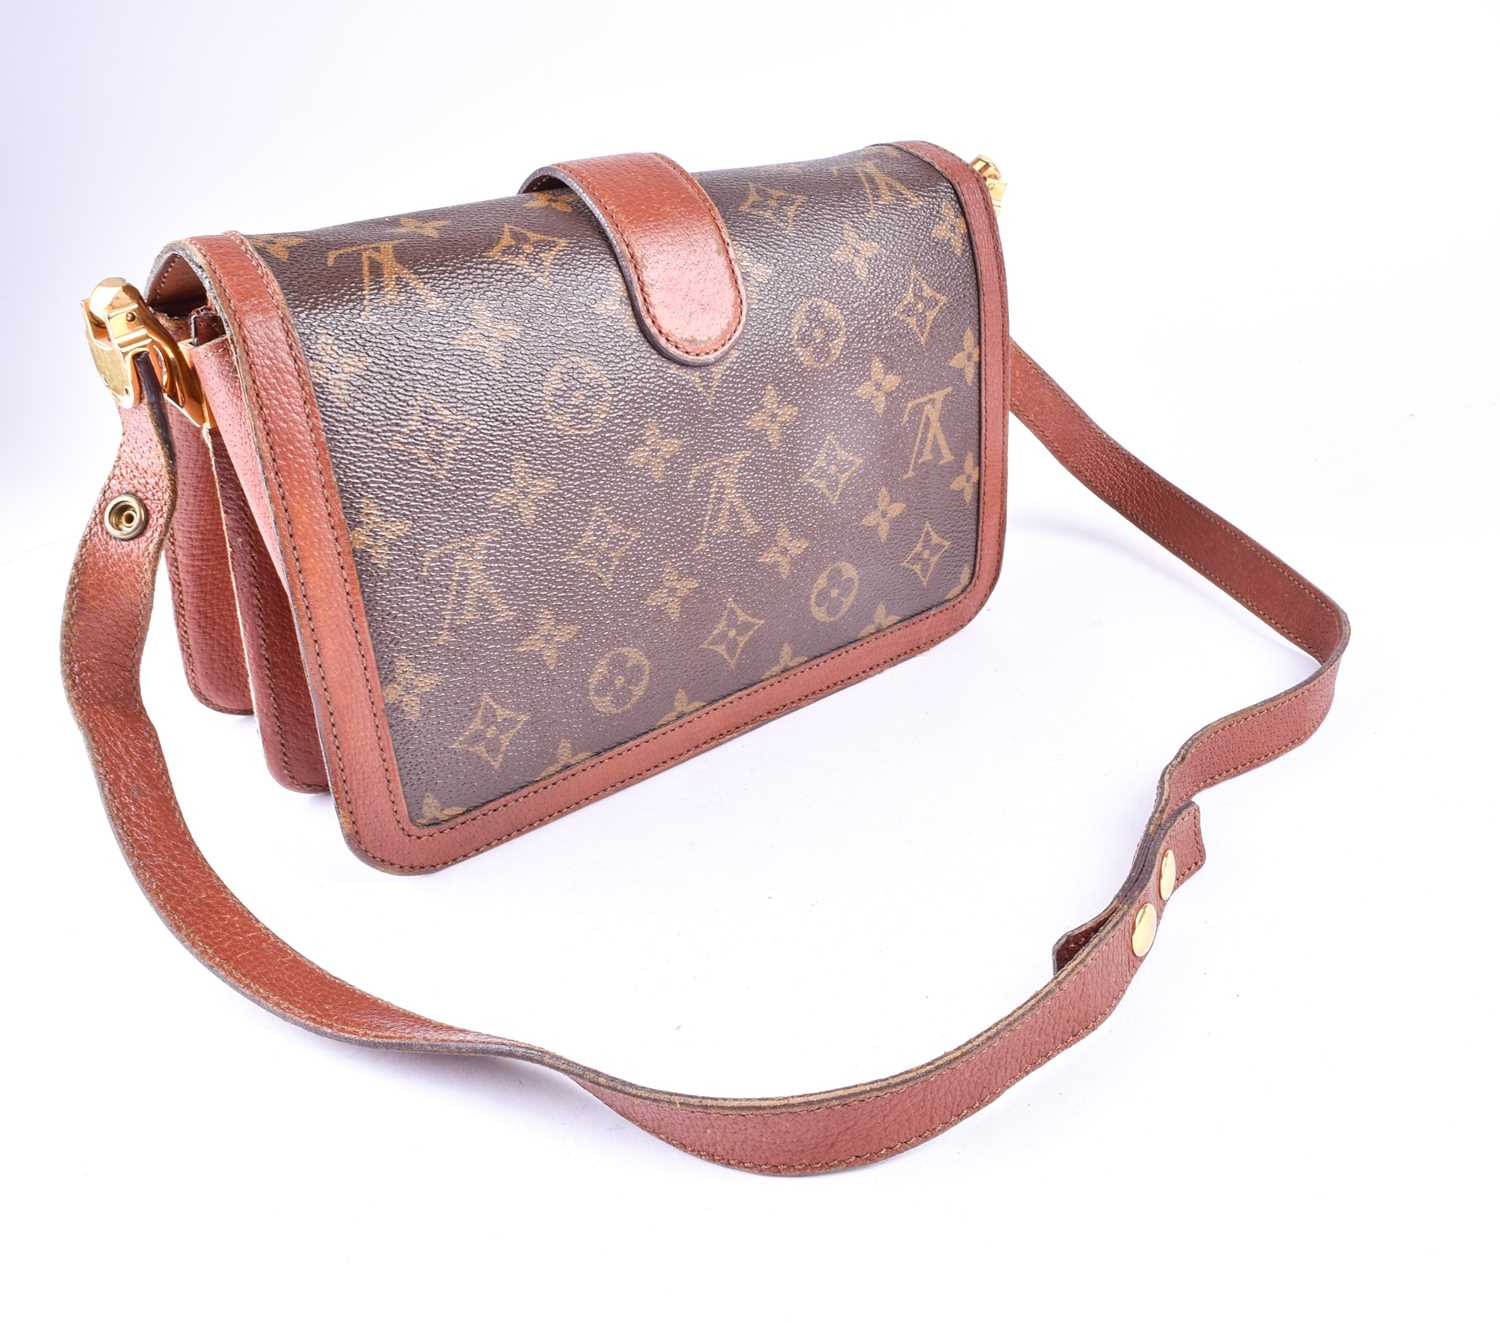 Louis Vuitton. A vintage 1980s monogram leather satchel handbag, with brown leather and monogram - Image 9 of 11